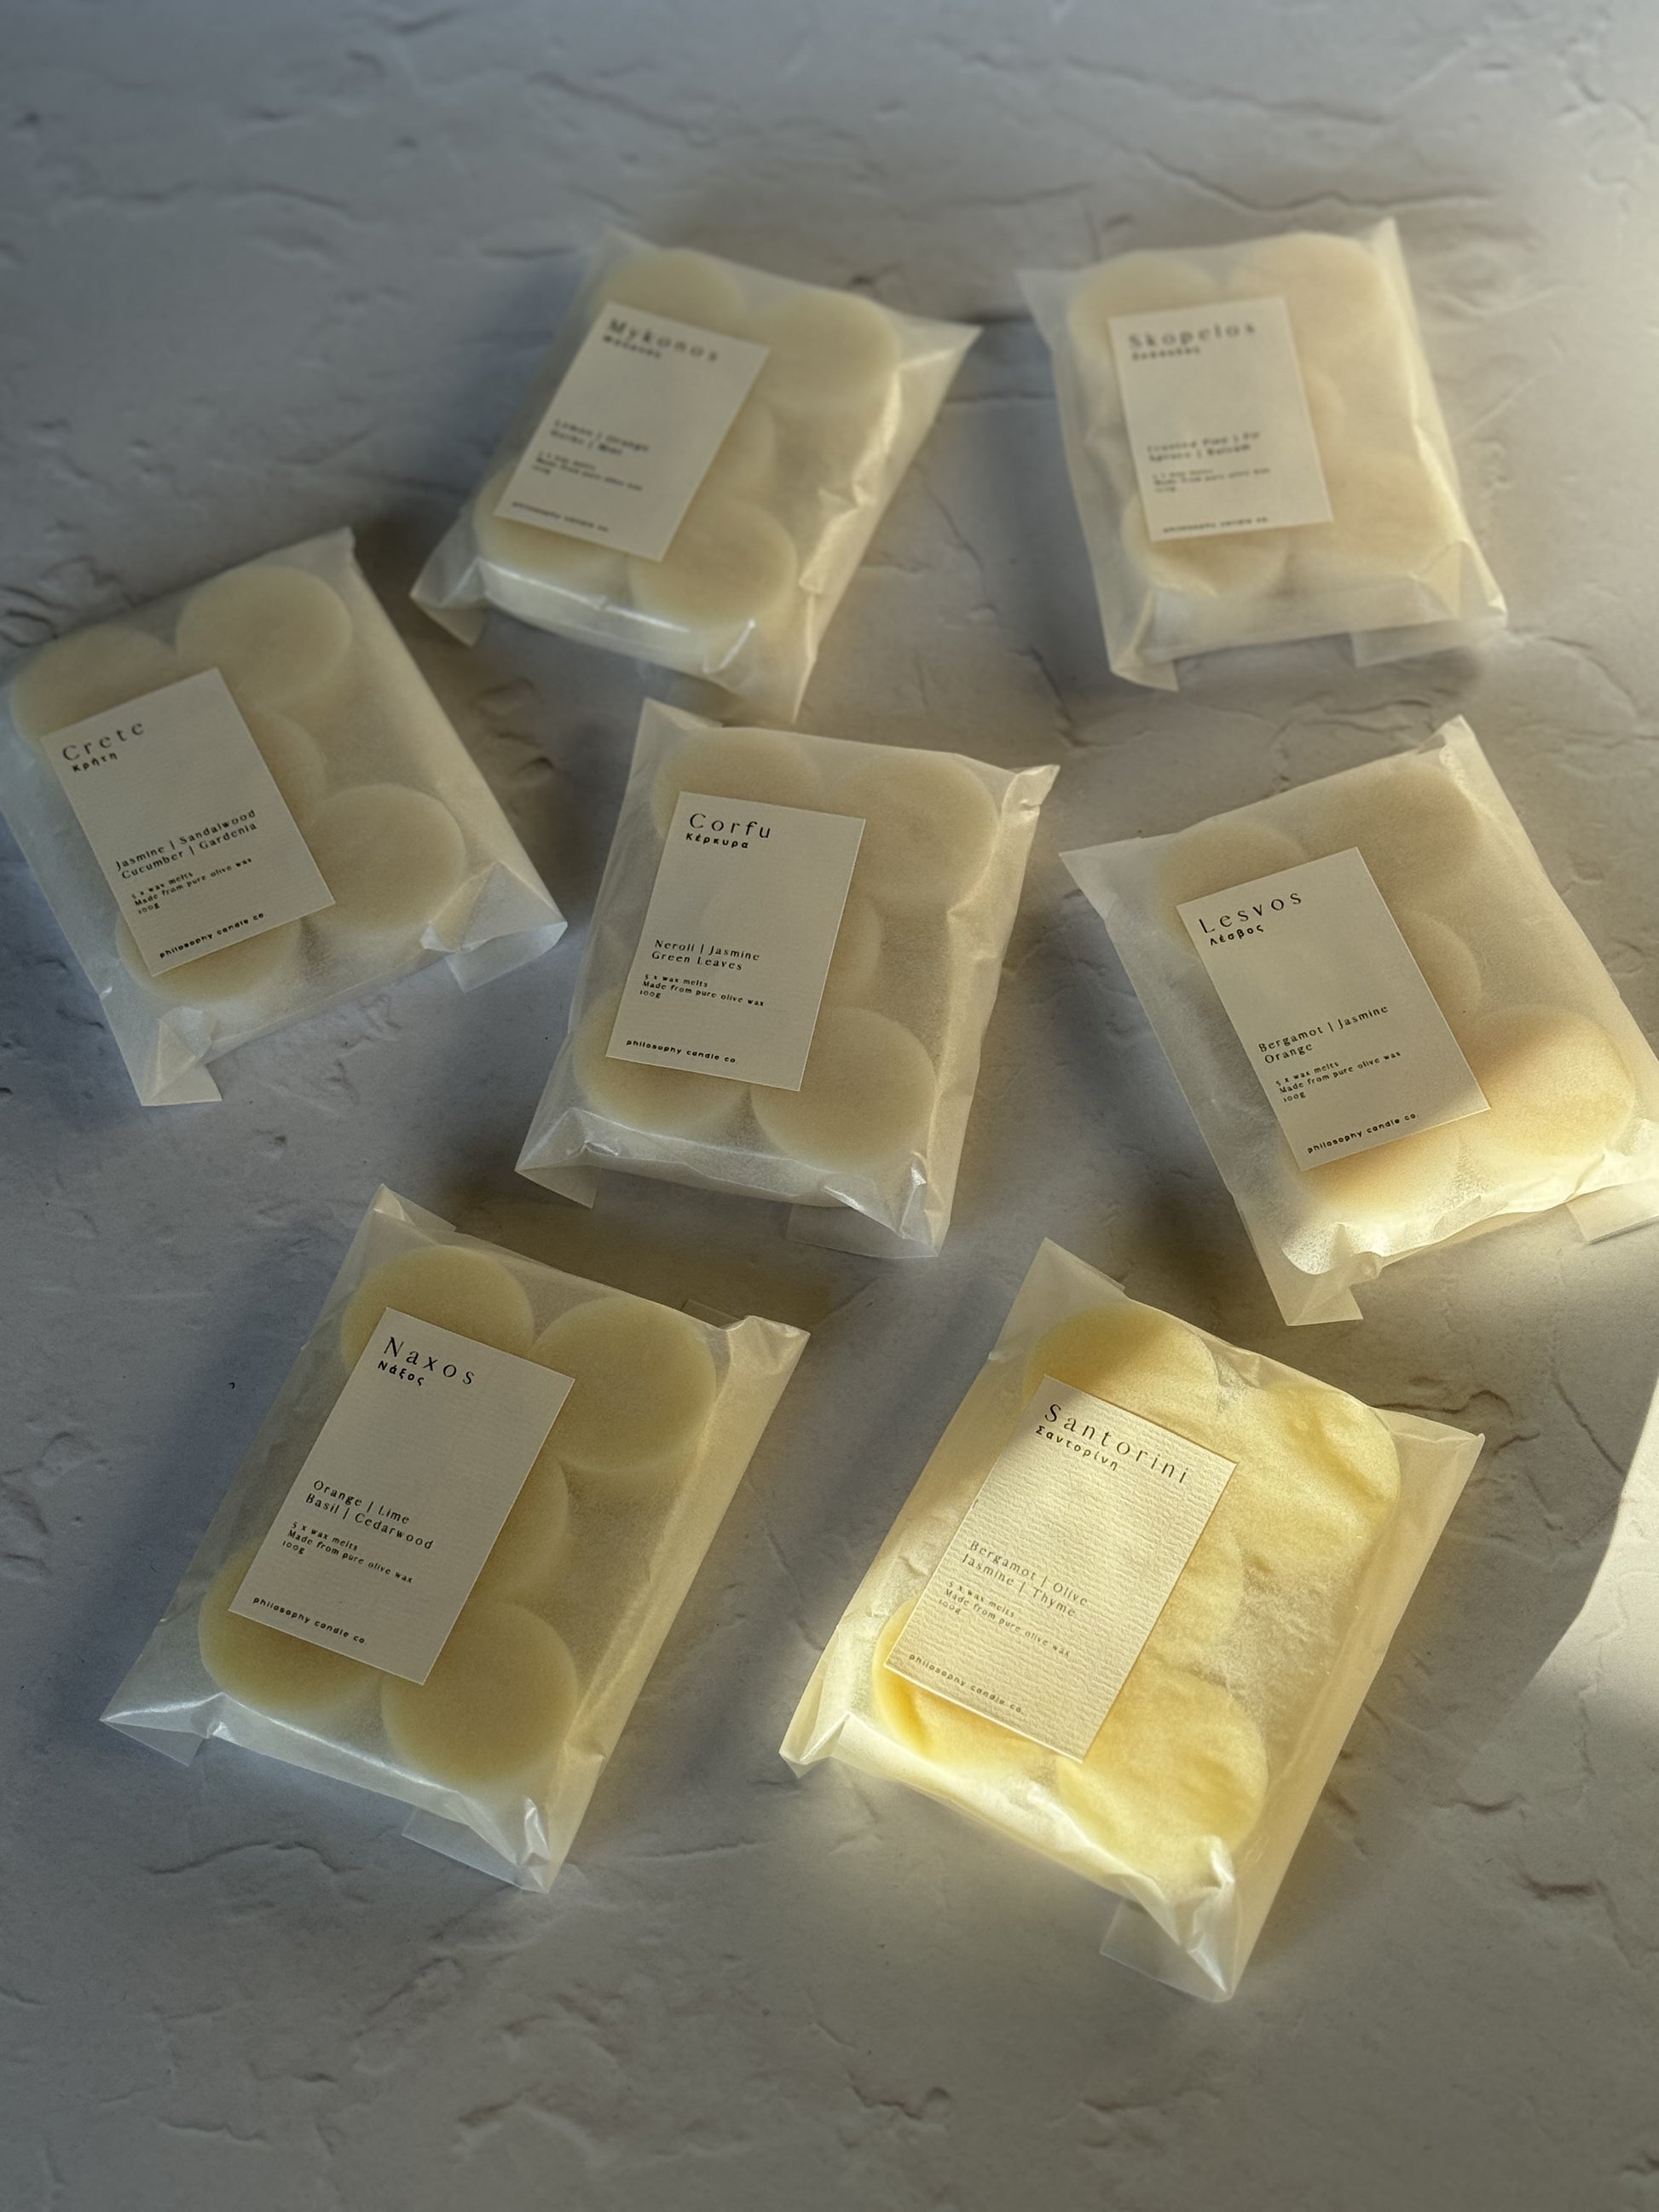 naxos wax melts - Philosophy Candle Co